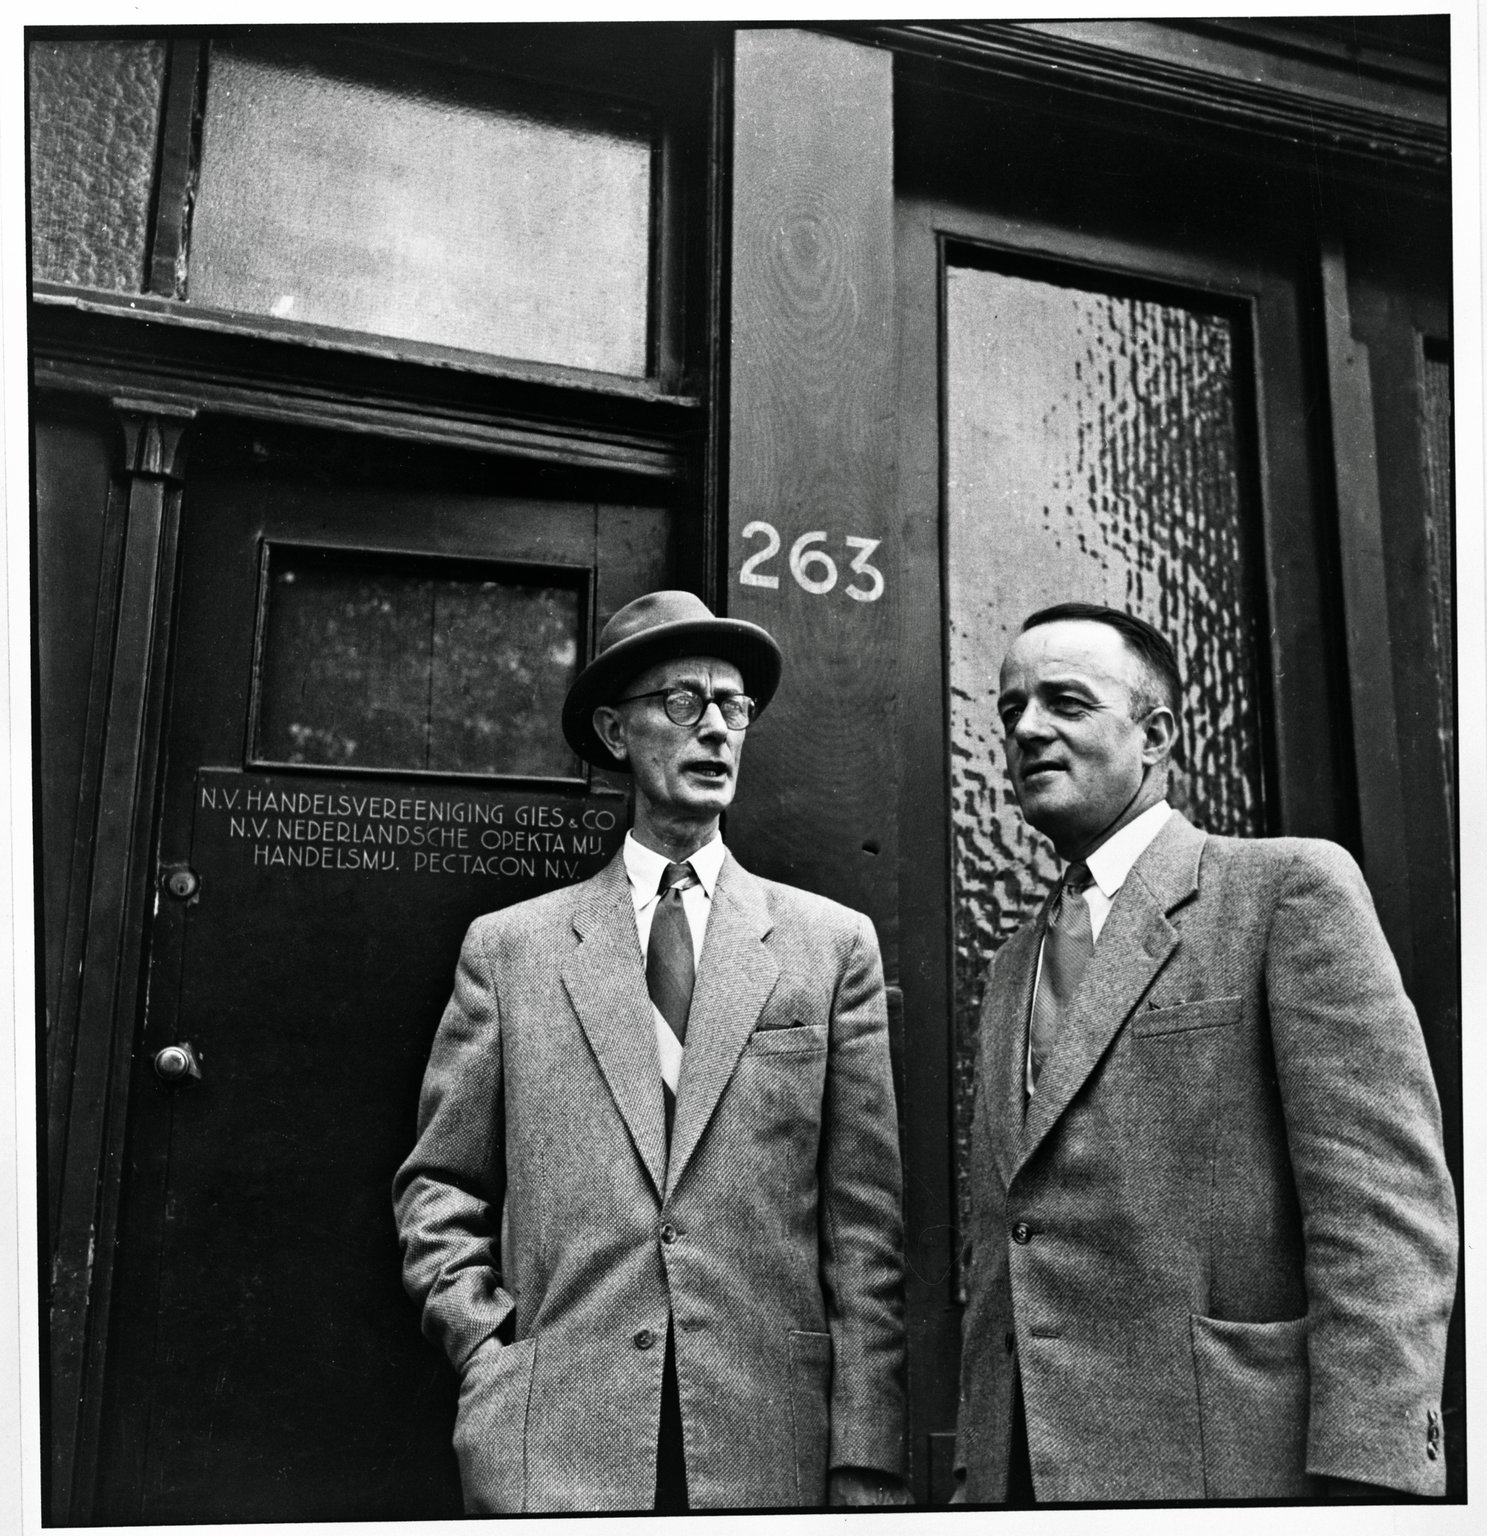 Johannes Kleiman (on the left) and Victor Kugler in front of Prinsengracht 263, 1954.